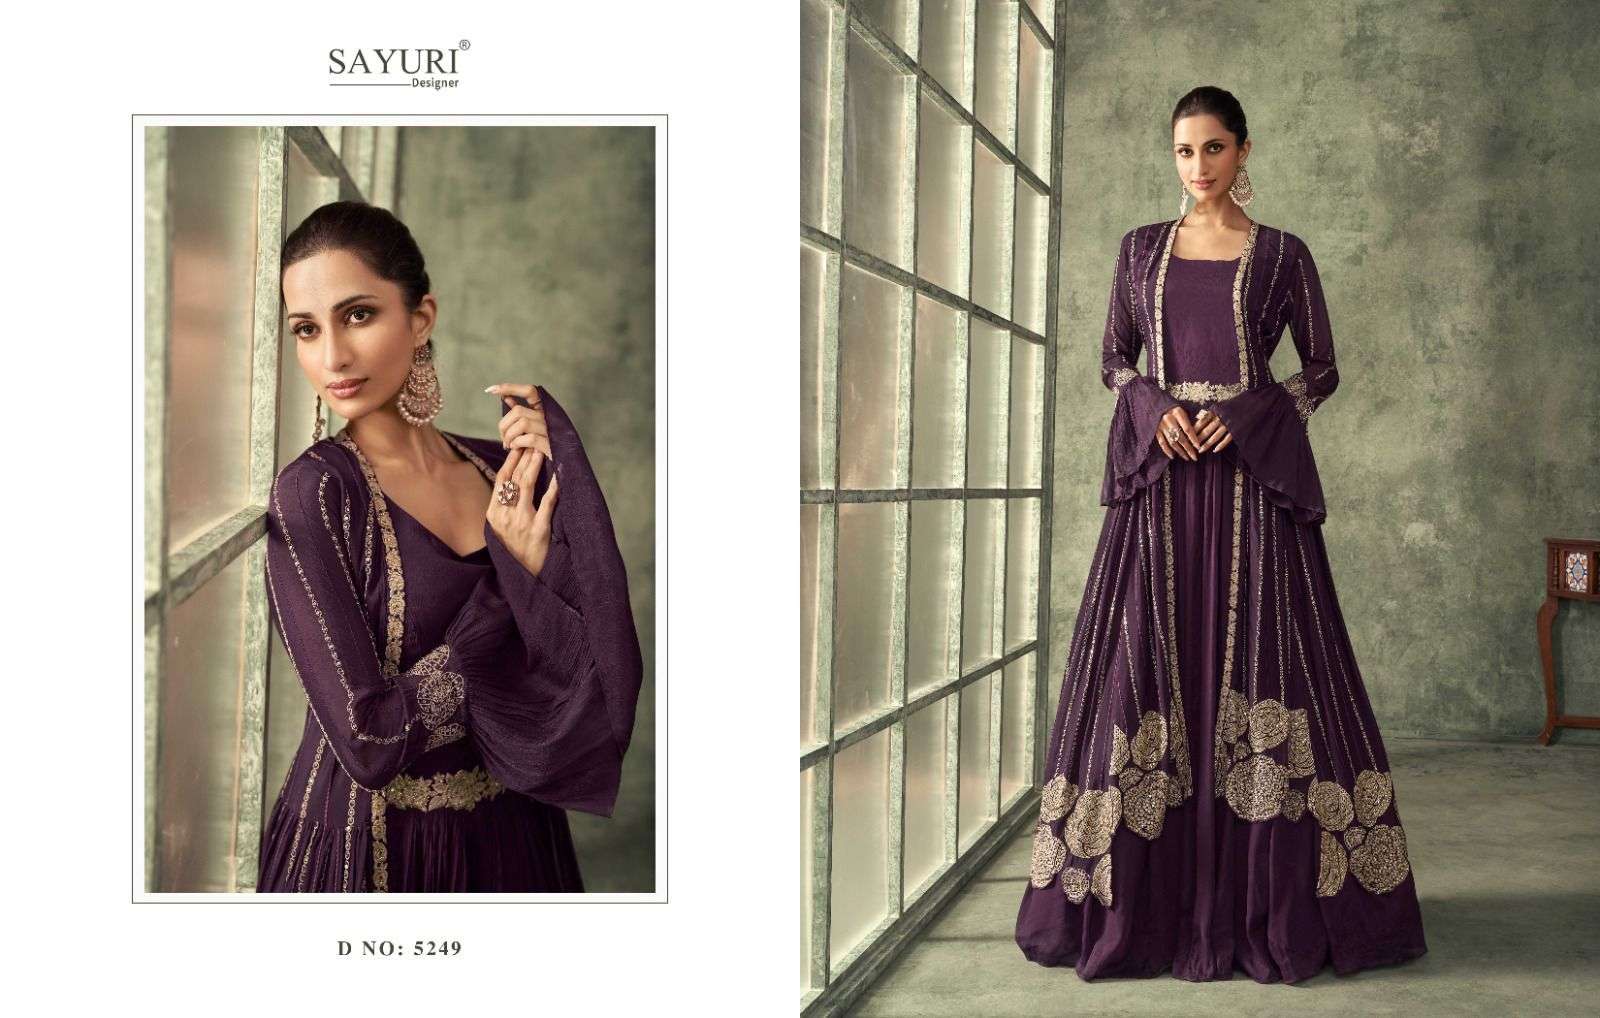 Evergreen By Sayuri 5249 To 5251 Series Designer Fetsive Suits Beautiful Fancy Colorful Stylish Party Wear & Occasional Wear Georgette/Chinnon/Silk Gowns With Dupatta At Wholesale Price